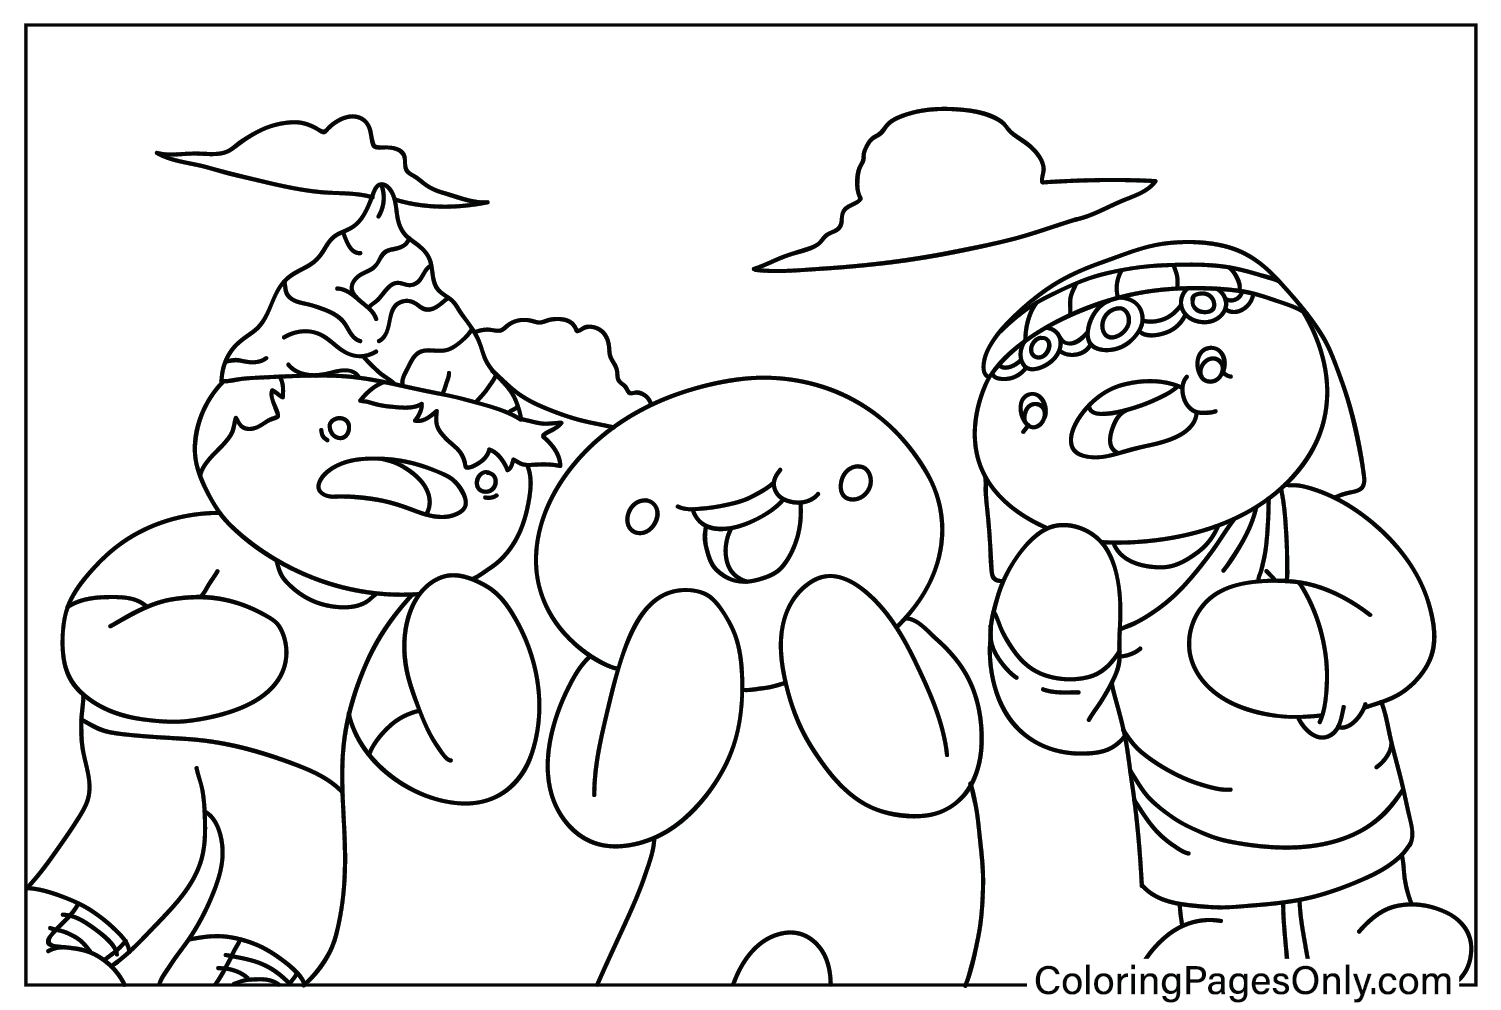 TheOdd1sOut Coloring Page PDF from TheOdd1sOut